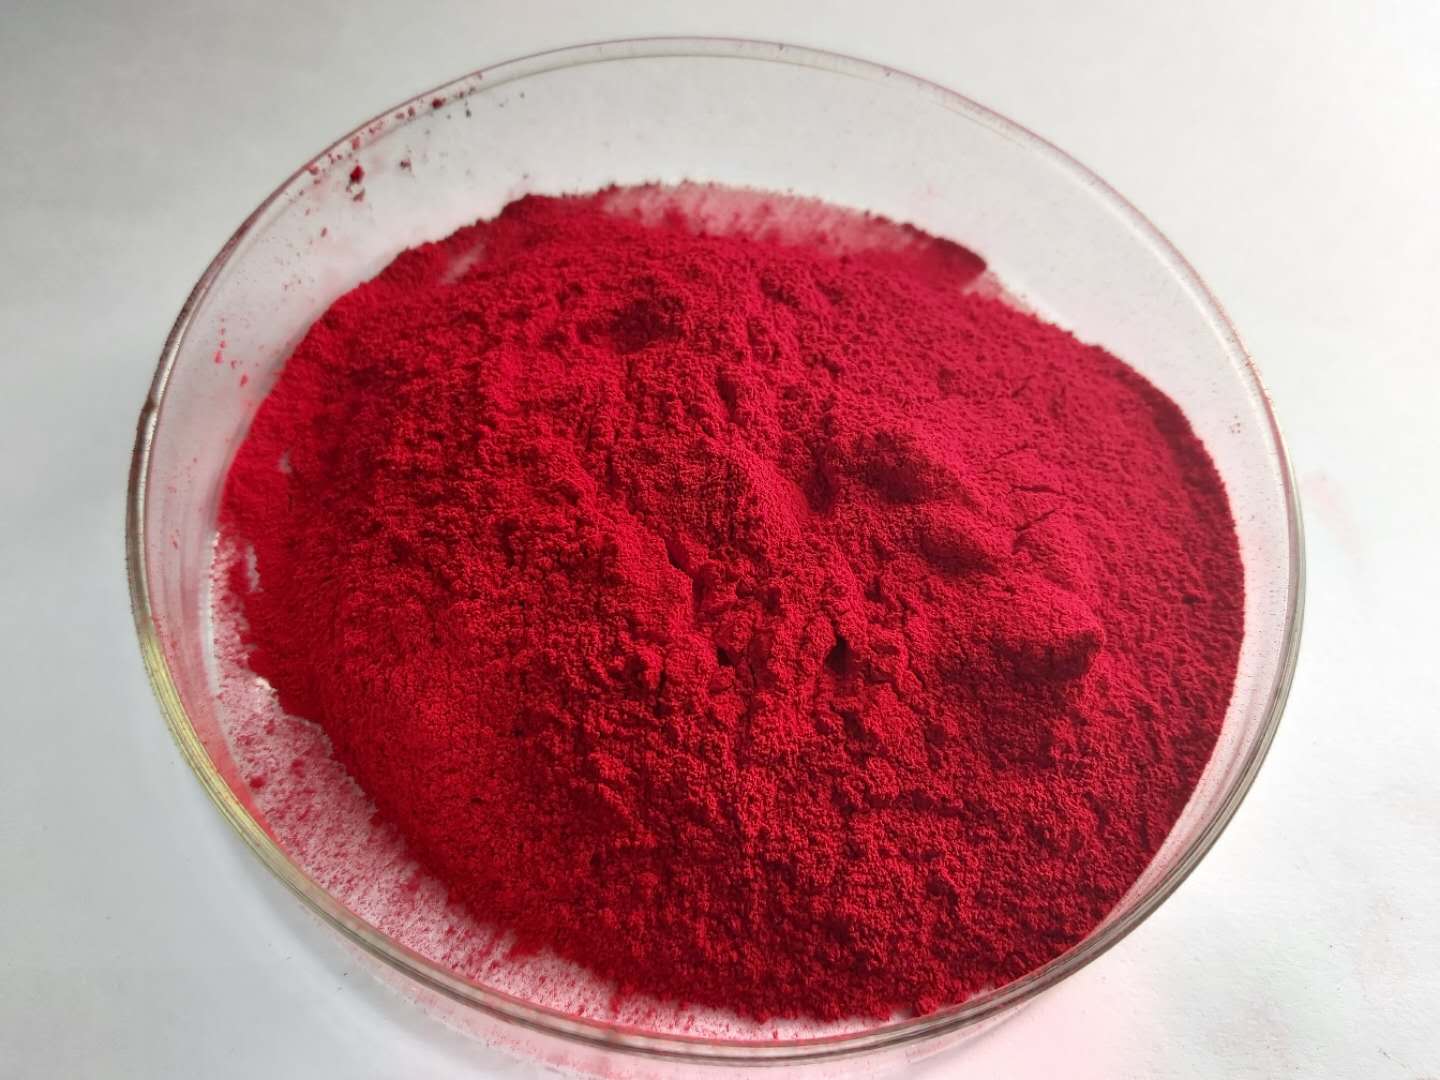 Colorants for Untreated Seeds Pigment Powder Pigment Red R3B-28 For SP/SL